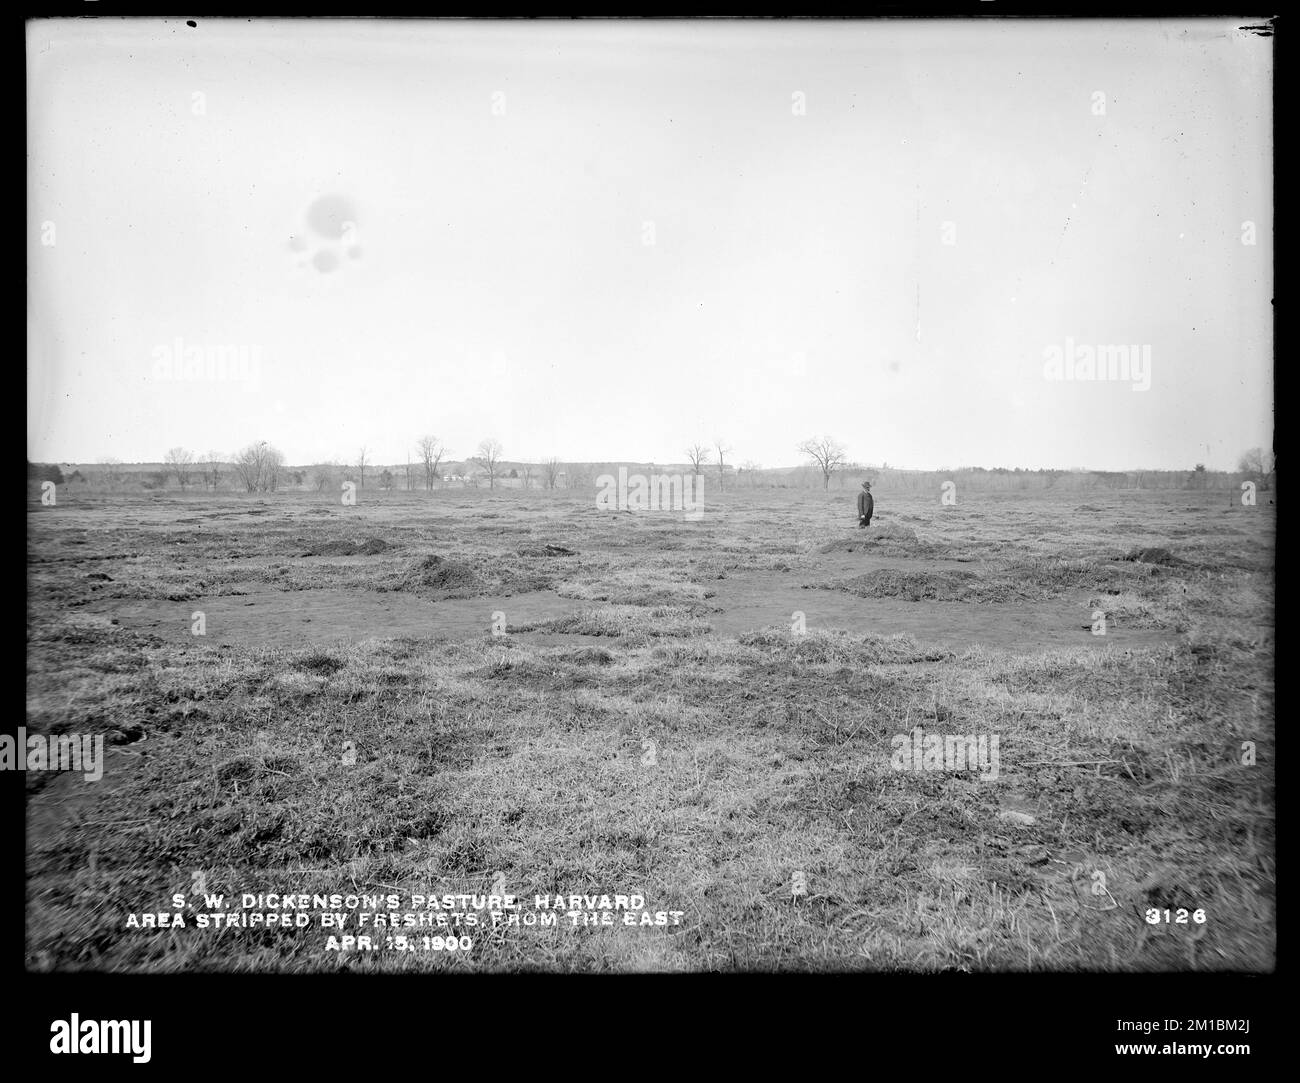 Wachusett Reservoir, S. W. Dickinson's pasture, area stripped by freshets, from the east, Harvard, Mass., Apr. 15, 1900 , waterworks, reservoirs water distribution structures, watershed sanitary improvement Stock Photo